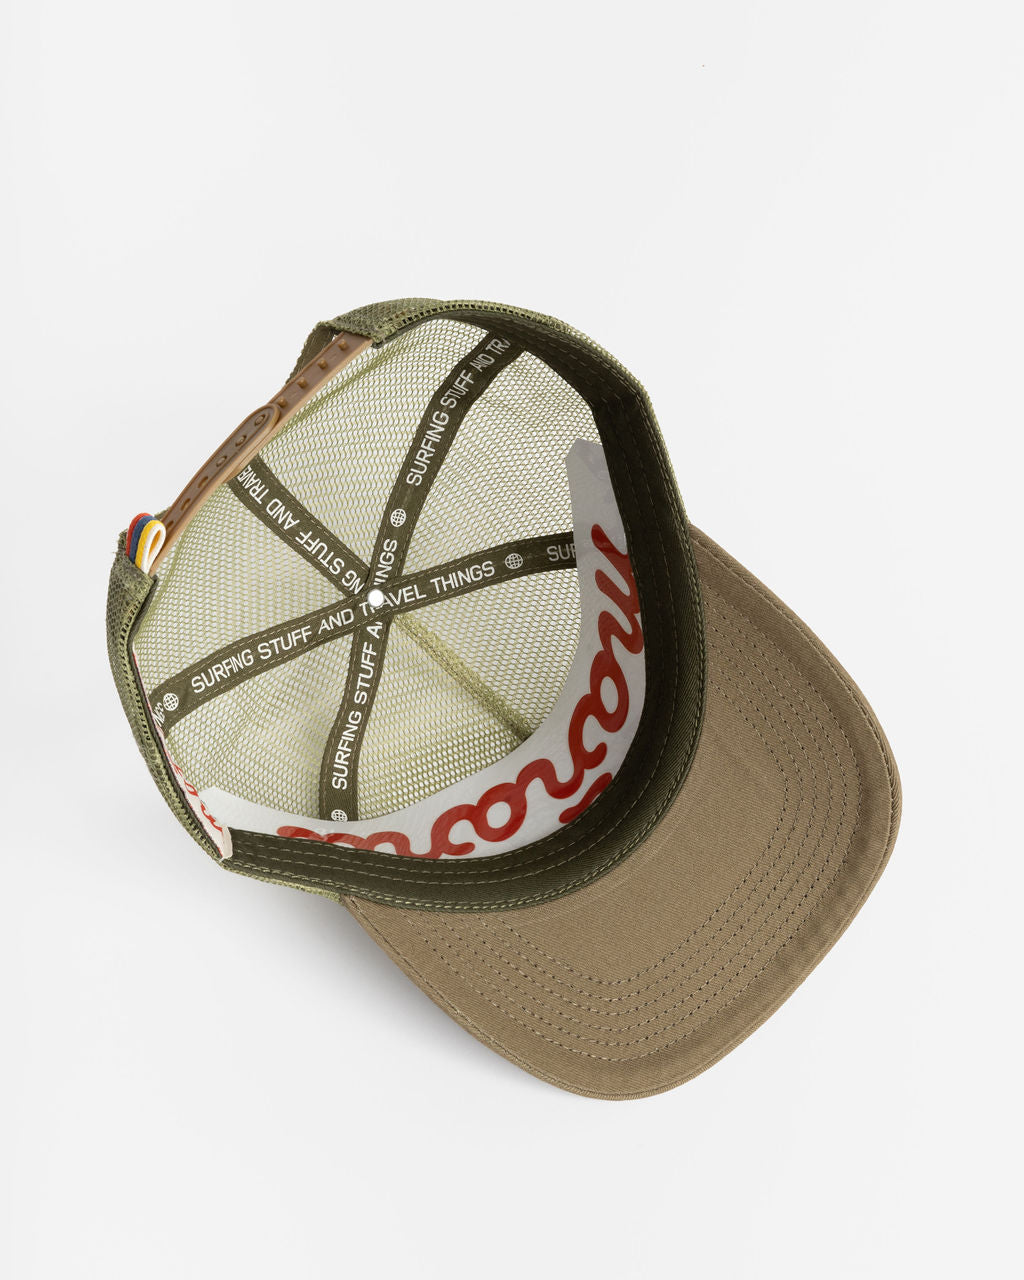 Sub Surf Mesh Trucker's Cap for Costume or Every Day 